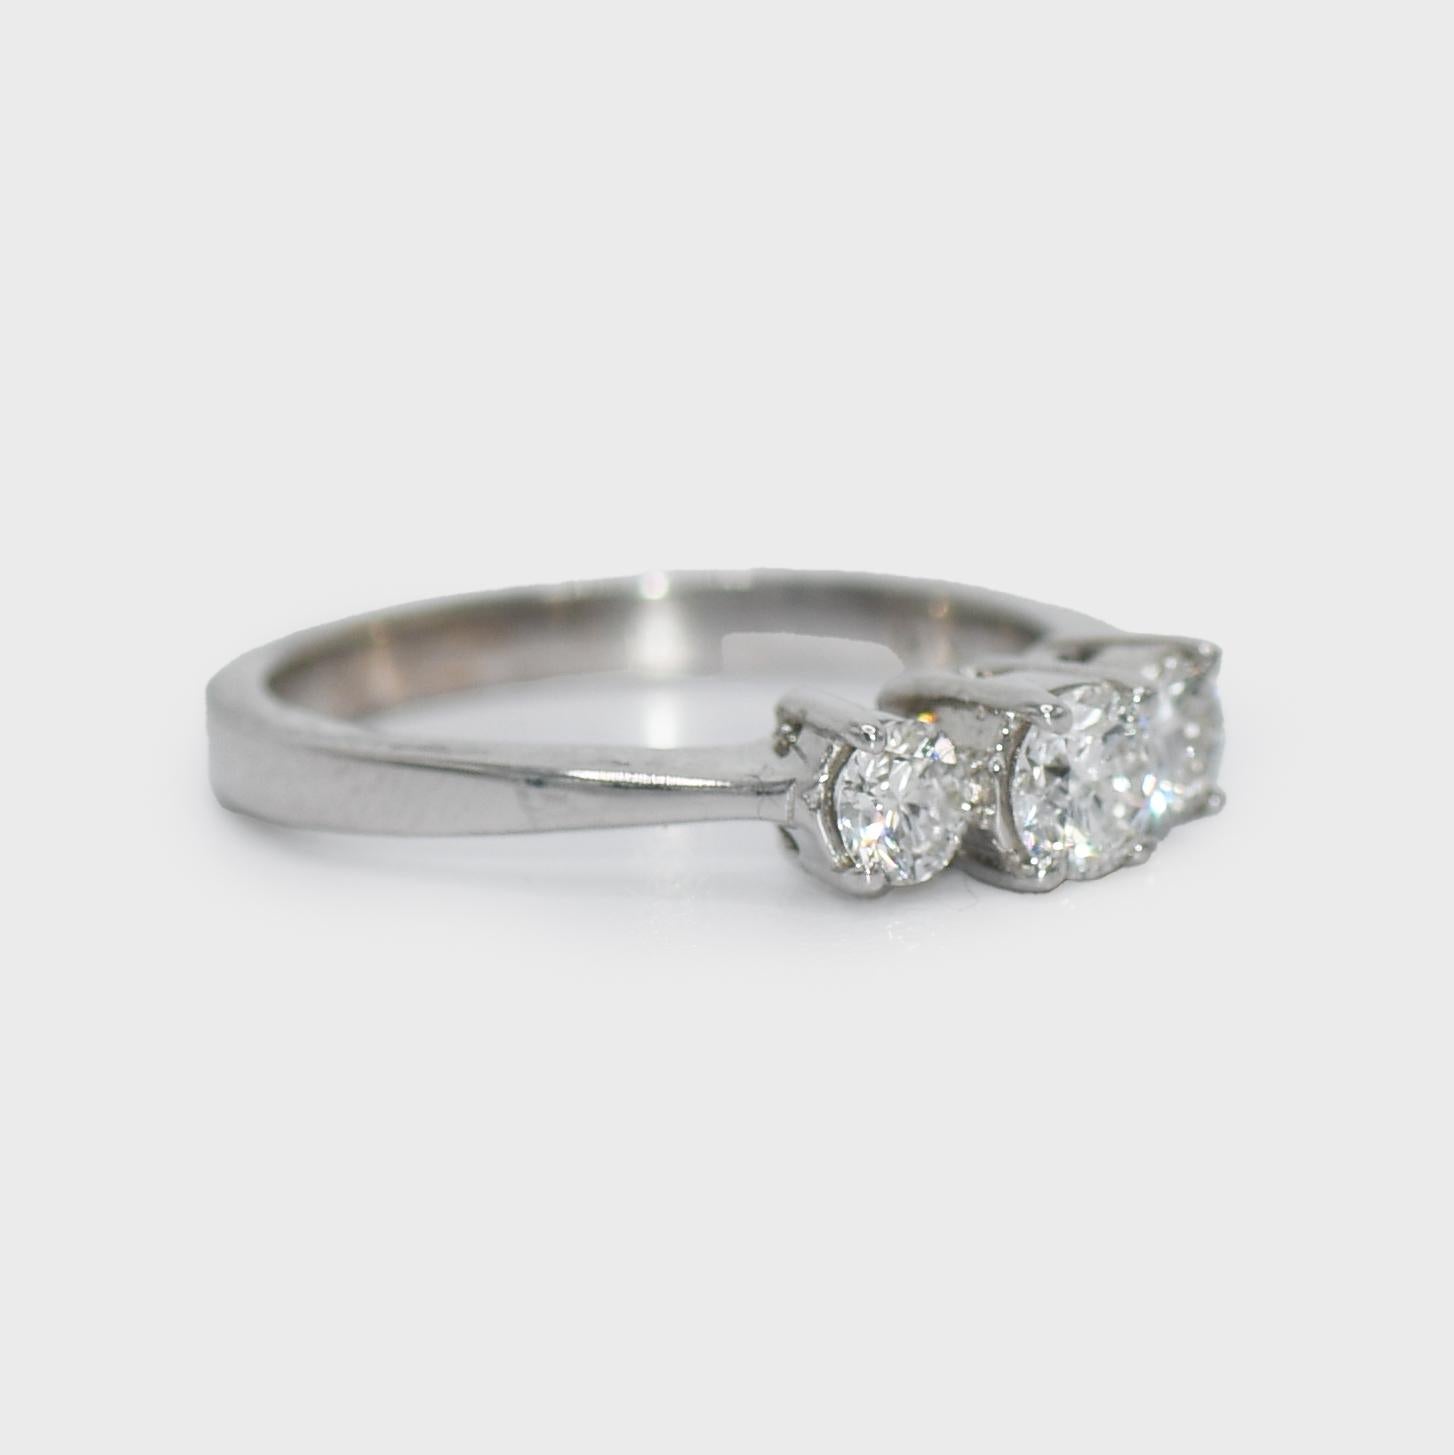 18K White Gold 3 Stone Diamond Ring .50tdw, 3.2gr
18k White Gold Diamond Ring. The ring weighs 3.2gr and is stamped 18k
There are three Round Brilliant Cut Diamonds, Center stone is .20ct, and both side stones are .15ct each. .50tdw 
Clarity is